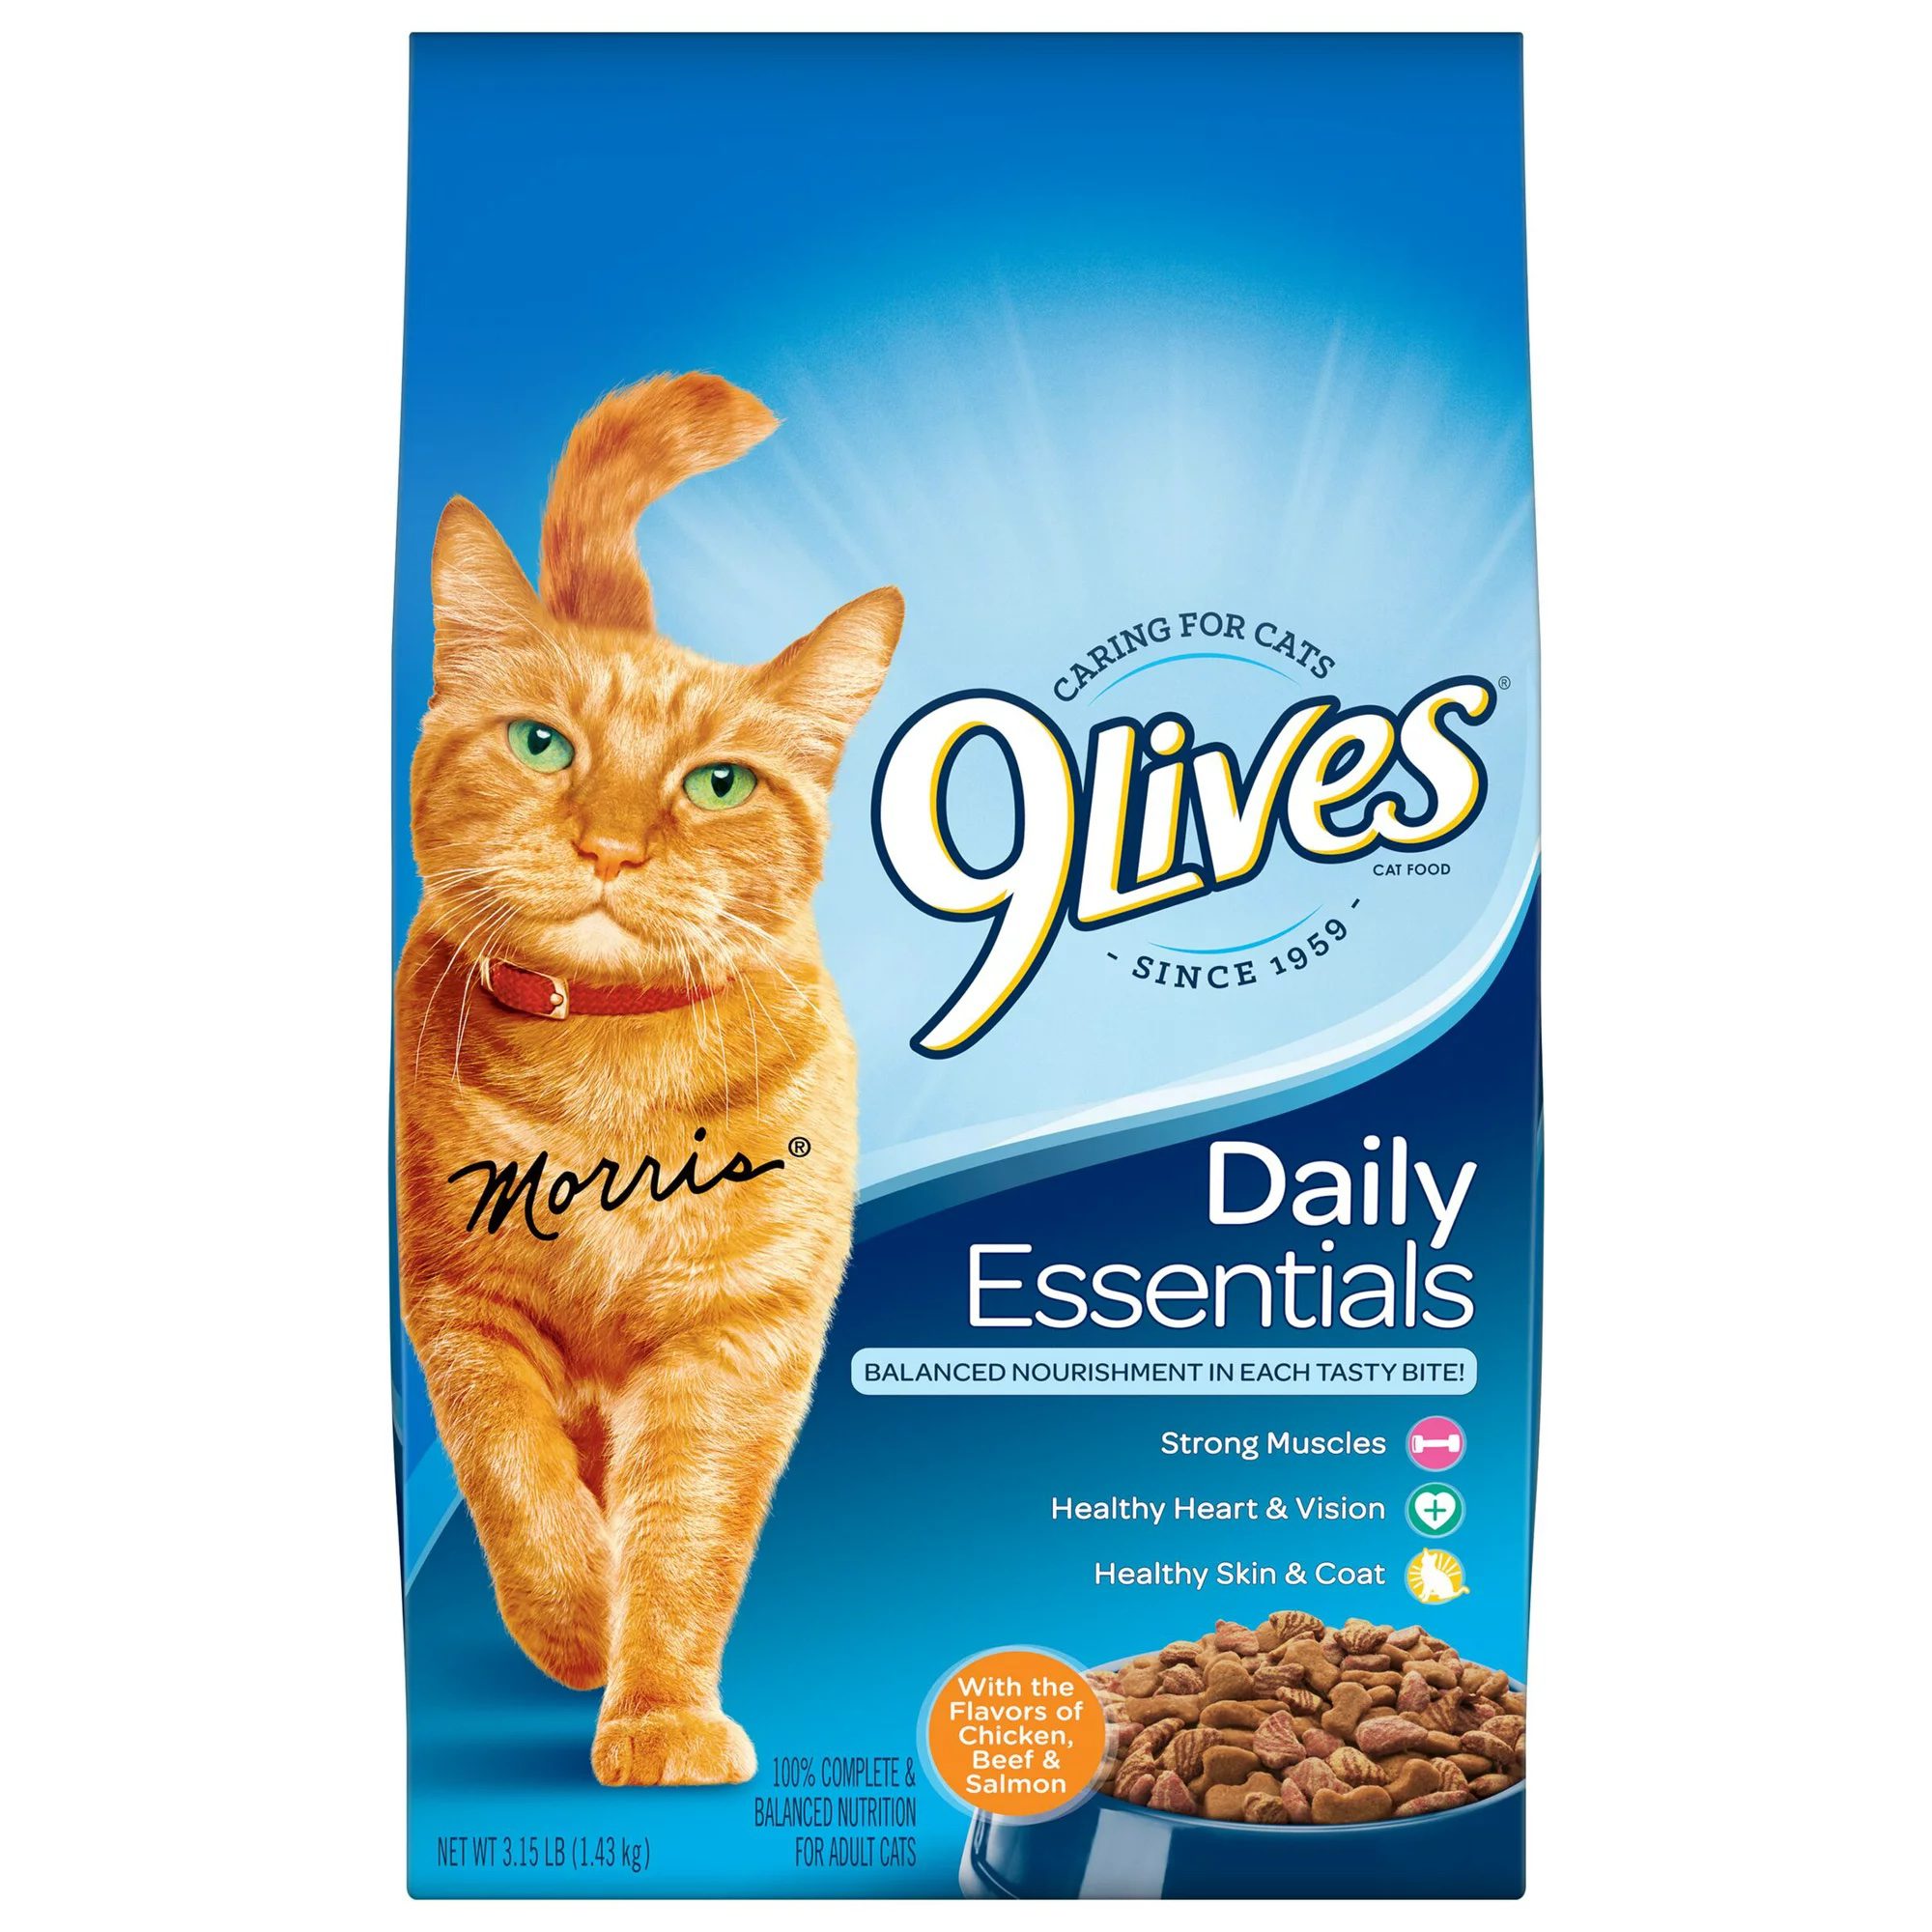 9Lives Daily Essentials Dry Cat Food